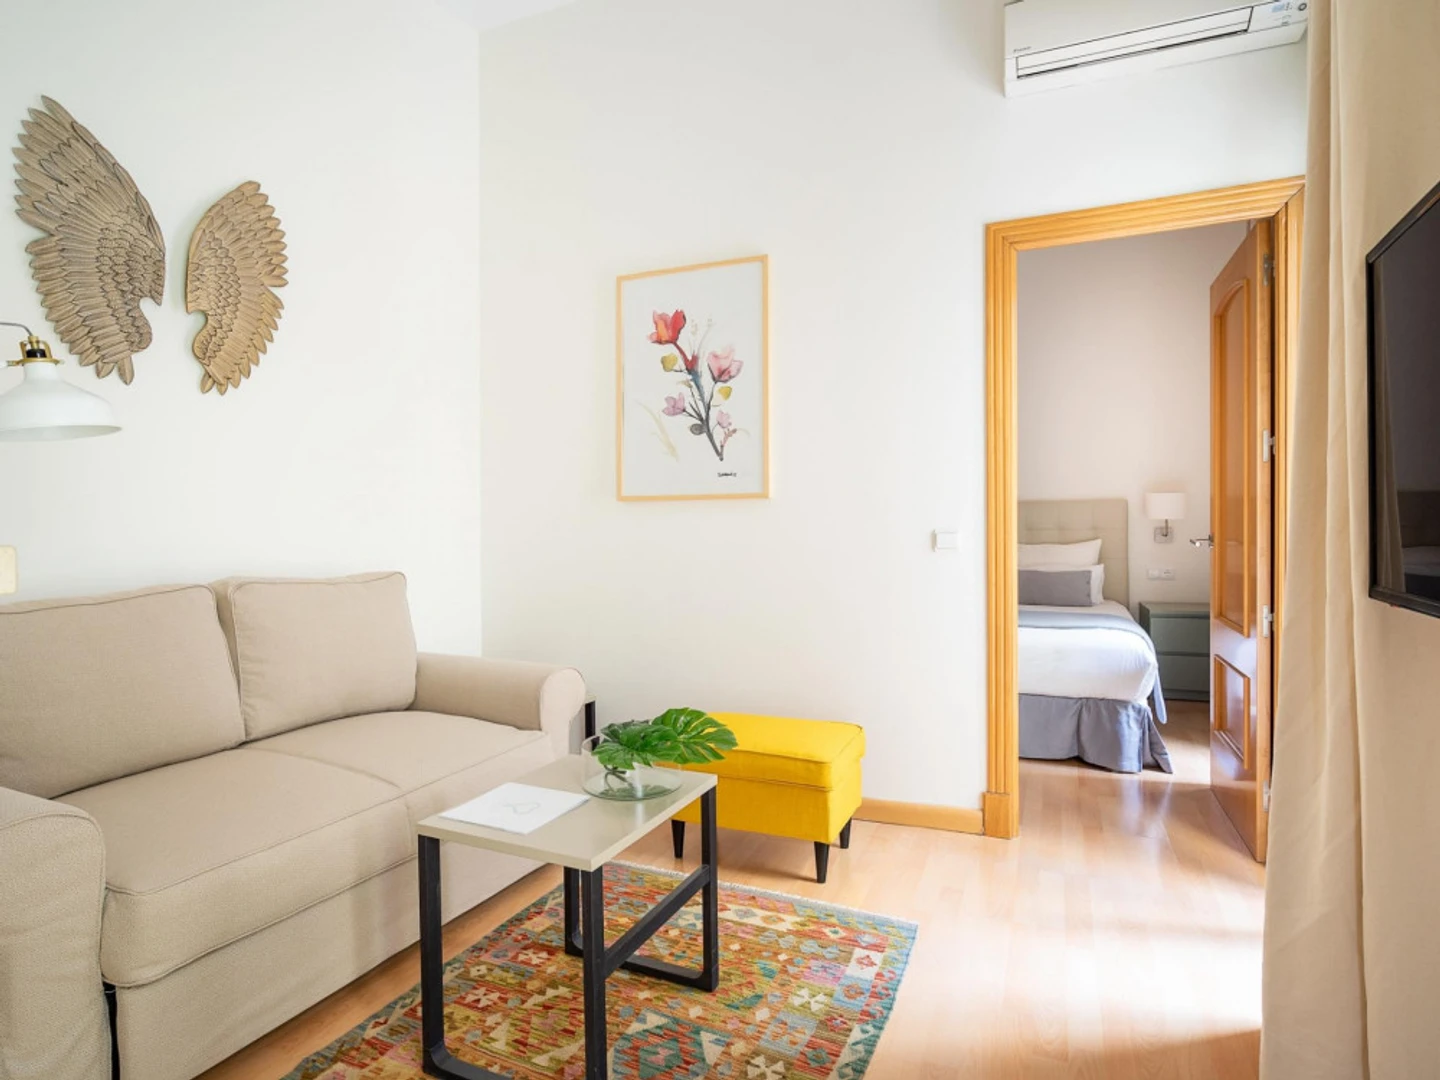 Accommodation with 3 bedrooms in Malaga